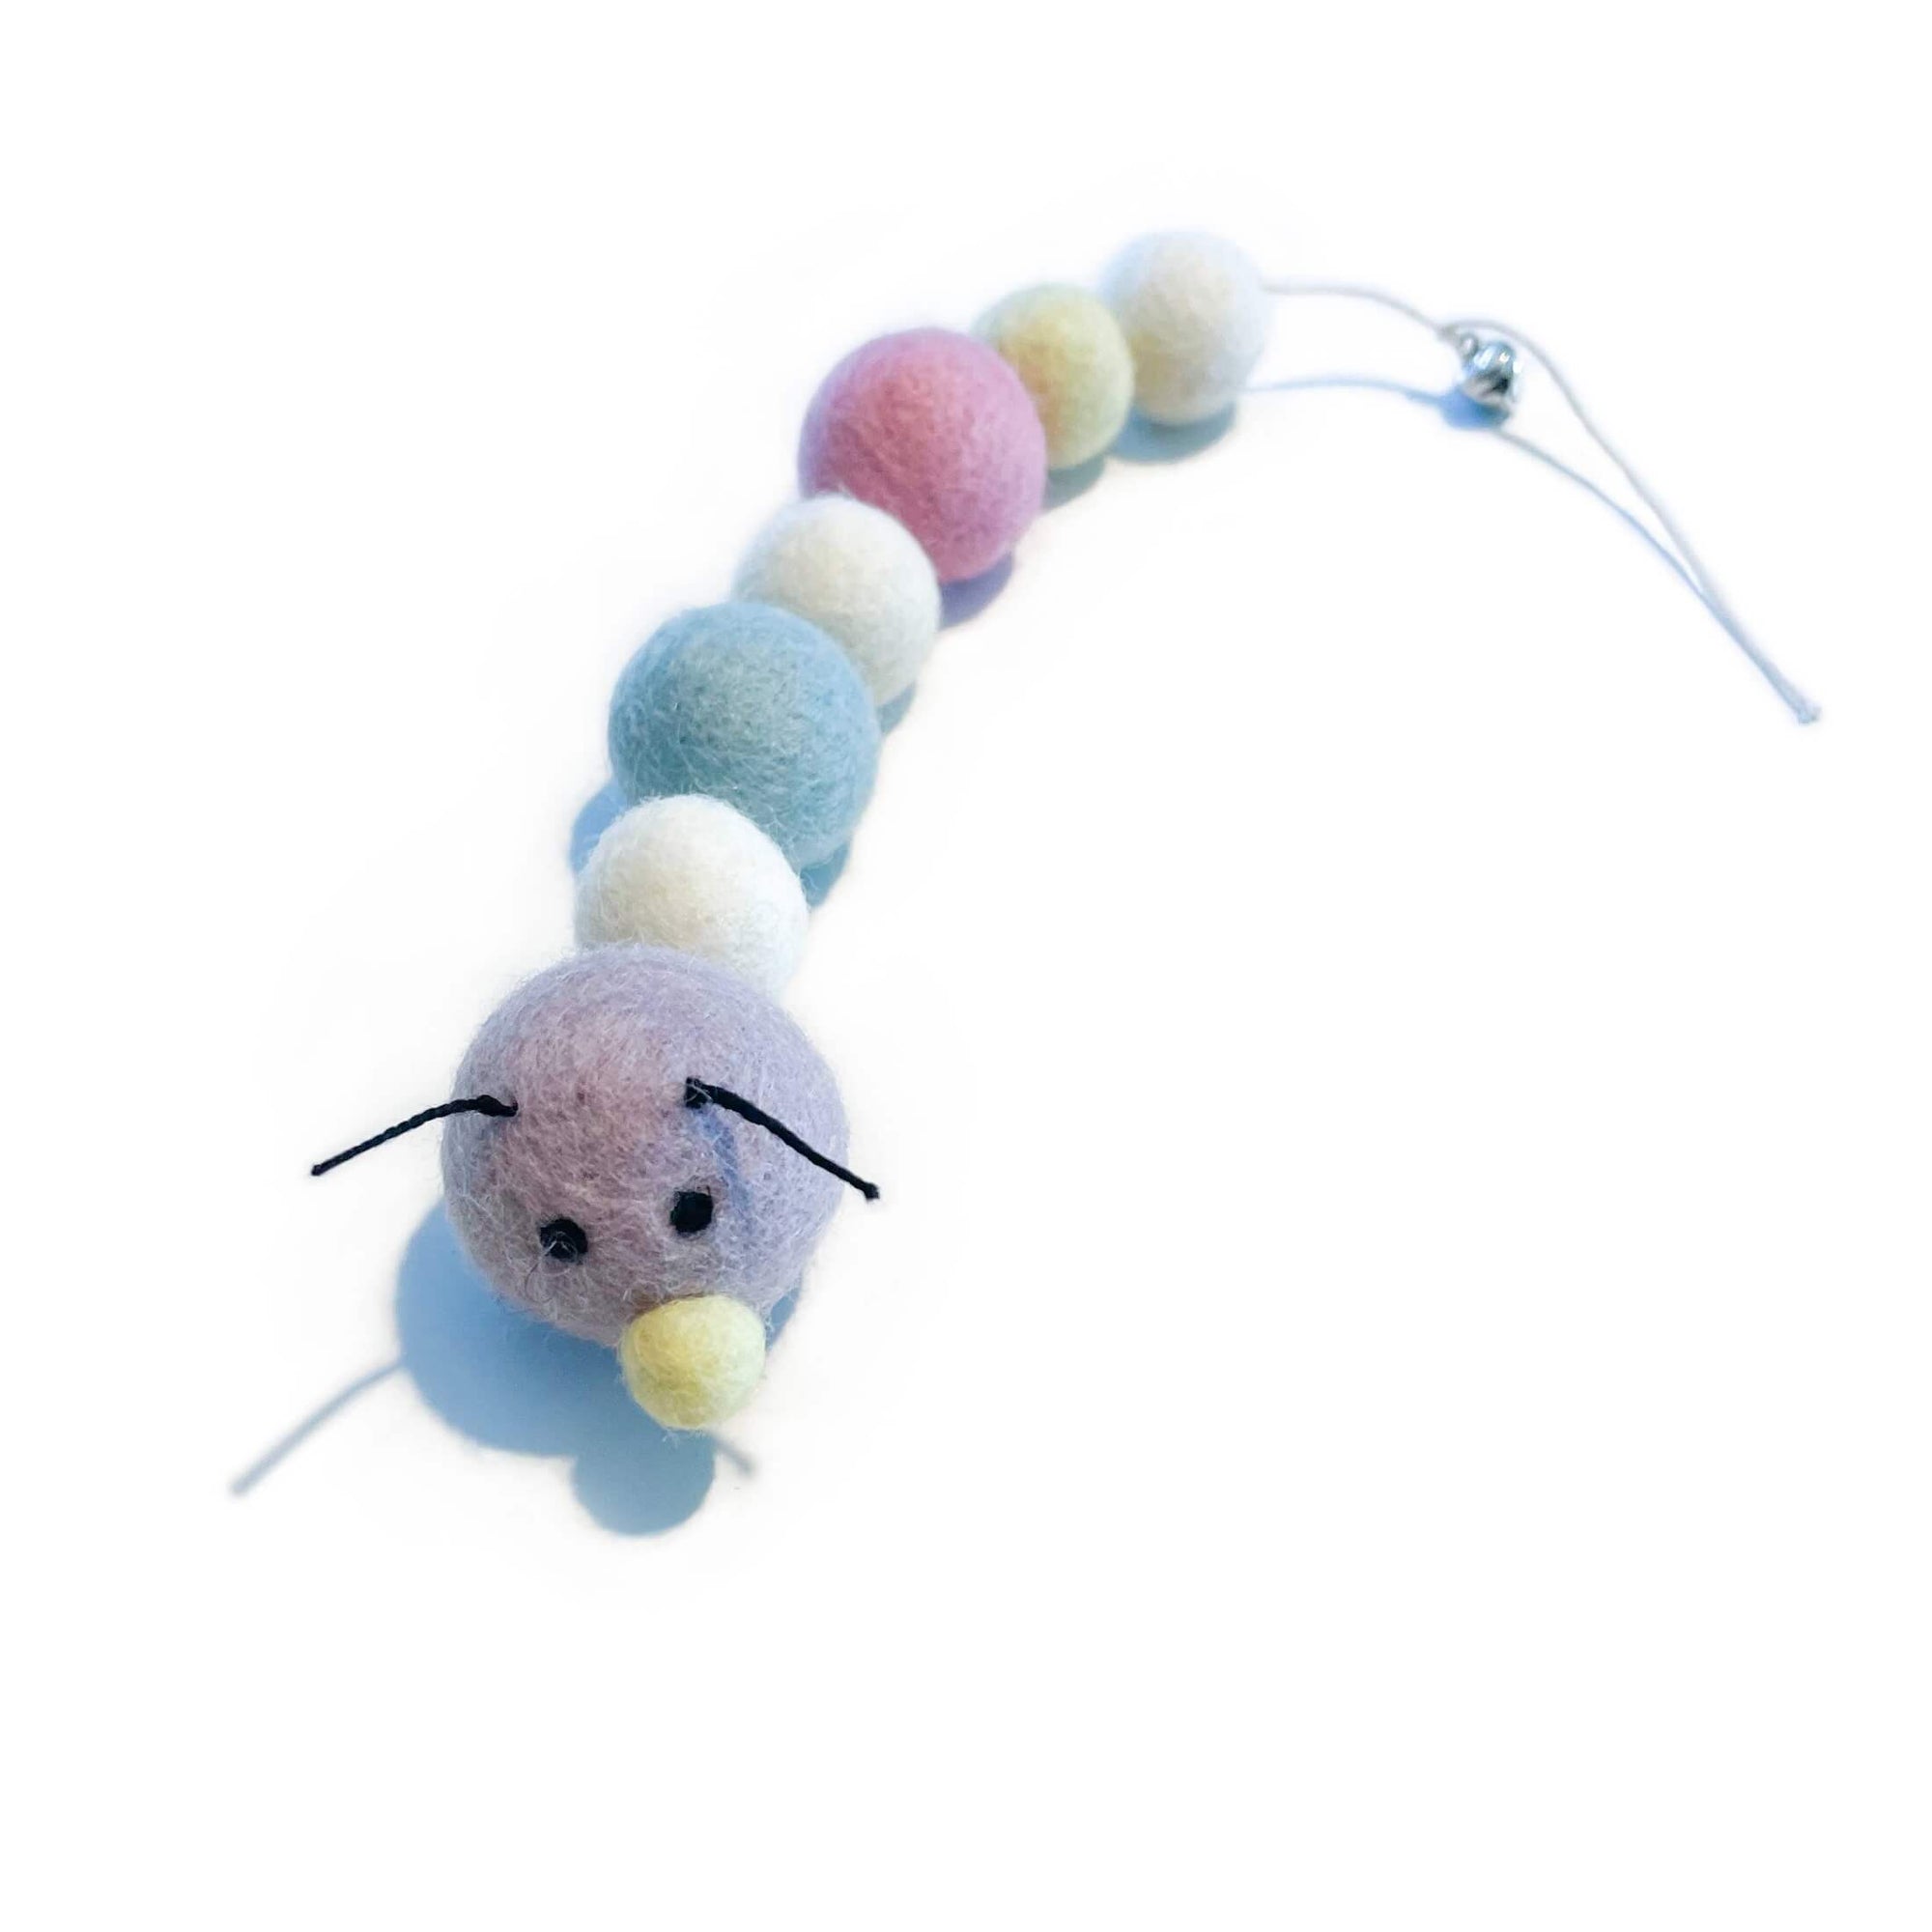 Organic wool caterpillar cat toy in pastel tones (purple, white, blue, pink &amp; yellow). Has bell at the end of its tail.